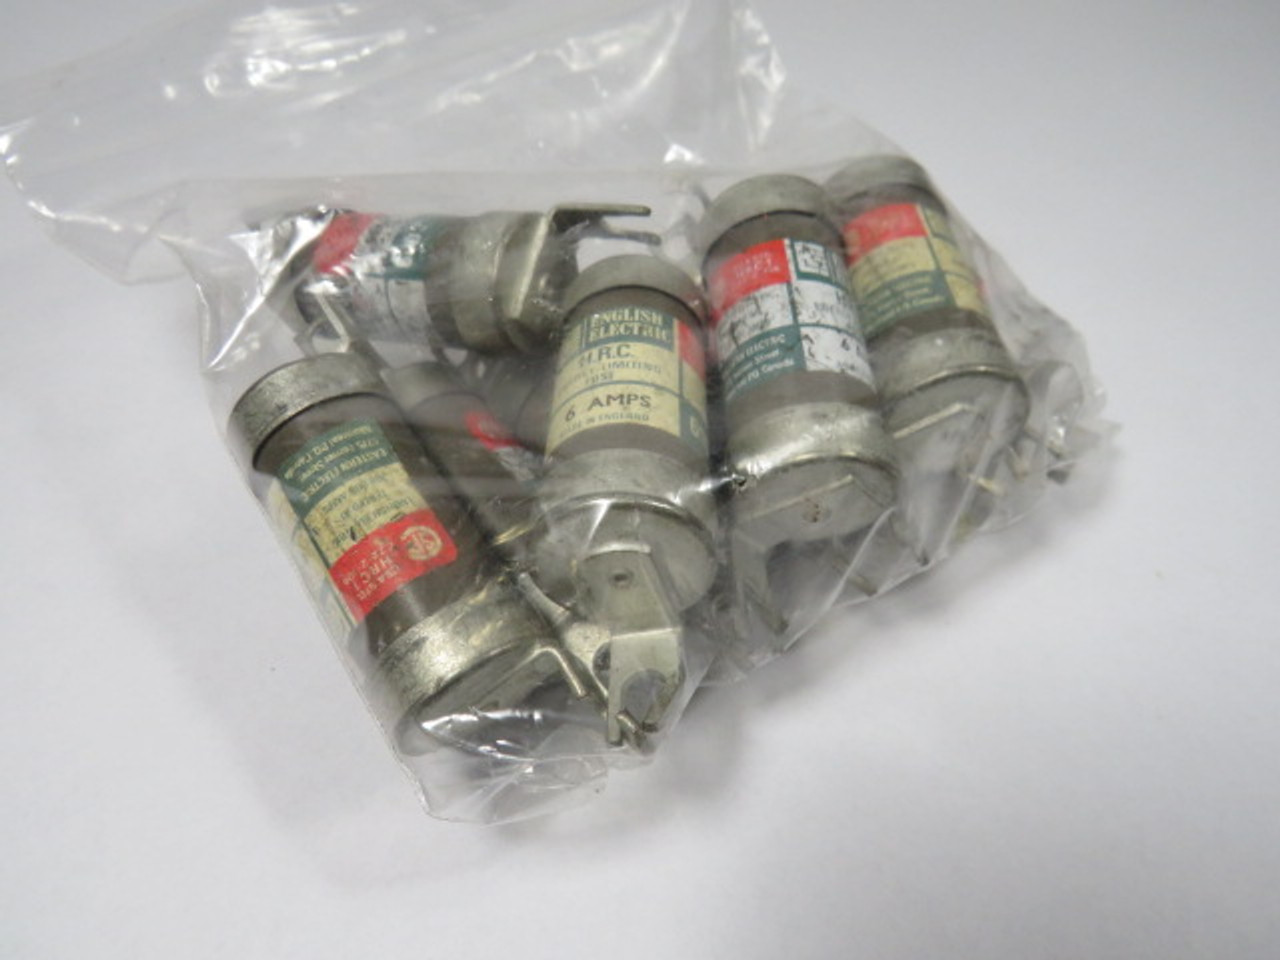 English Electric C6K Energy Limiting Fuse 6A 600V Lot of 10 USED